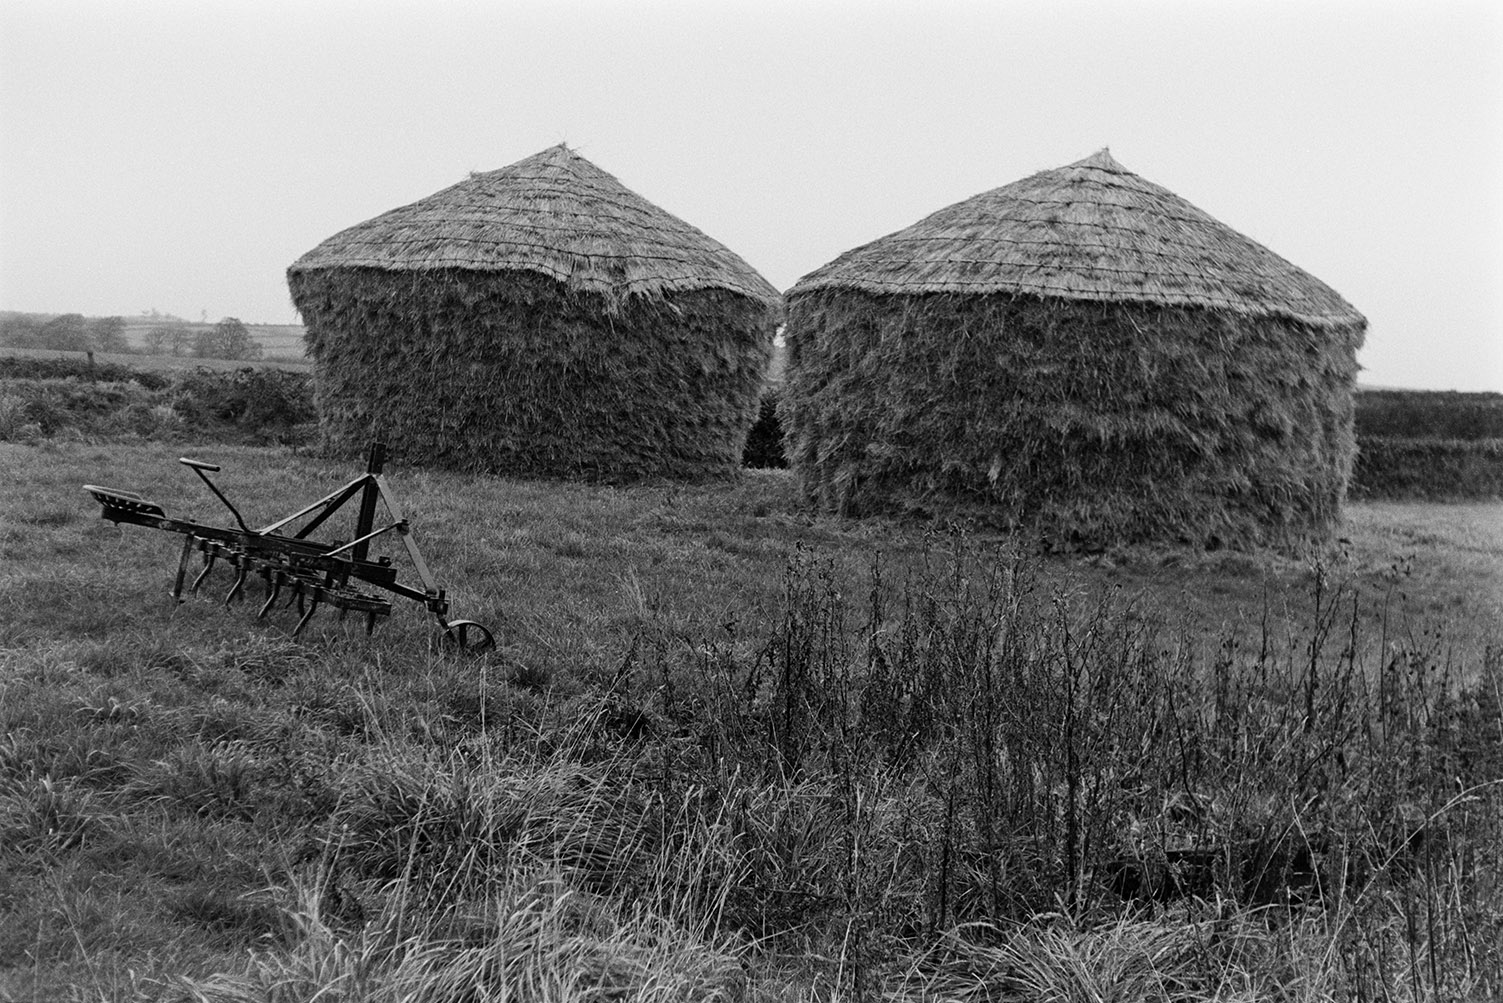 Two thatched wheat ricks in a field near Roborough. An item of farm machinery is lying in front of the ricks.